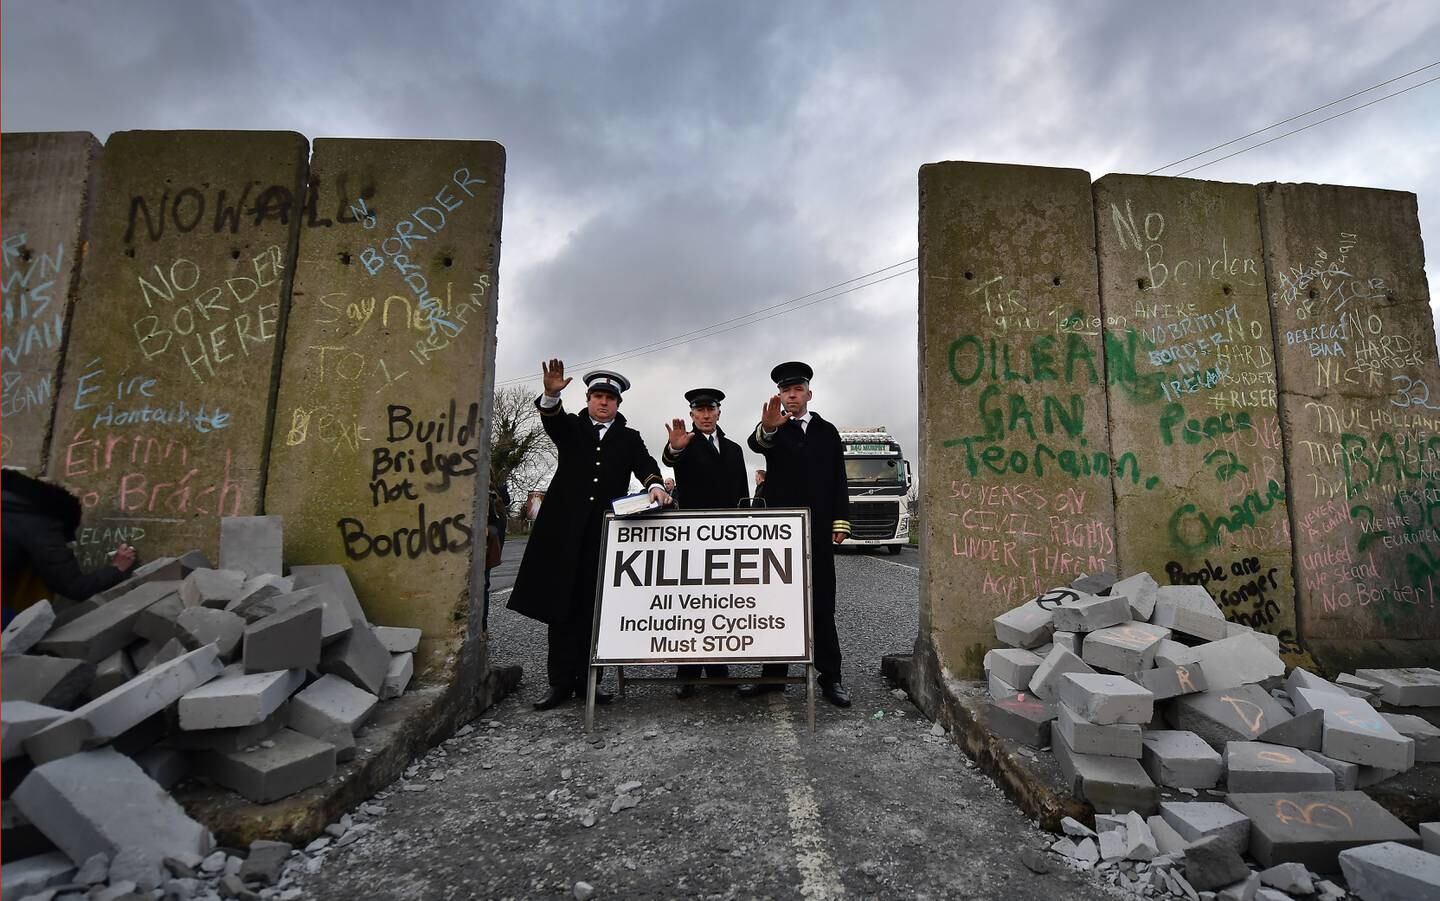 Members of the Border Communities against Brexit group dressed as customs officers take part in a mock border wall and customs checkpoint between Ireland and the UK. Getty Images